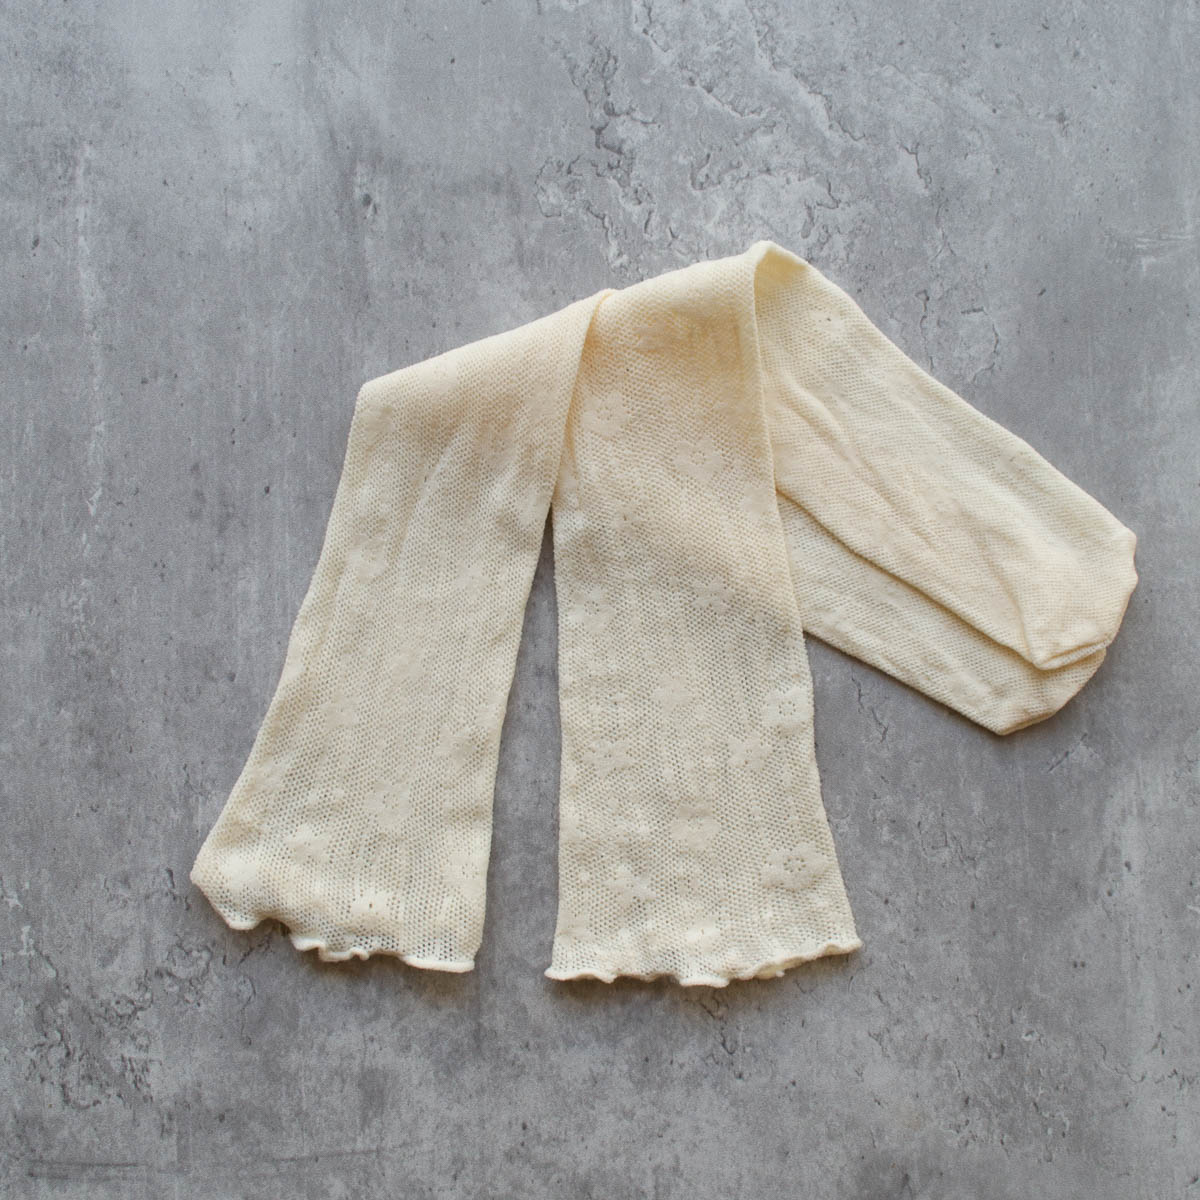 A pair of openwork knit socks in a creamy off white color with a striped floral pattern. Seen flat